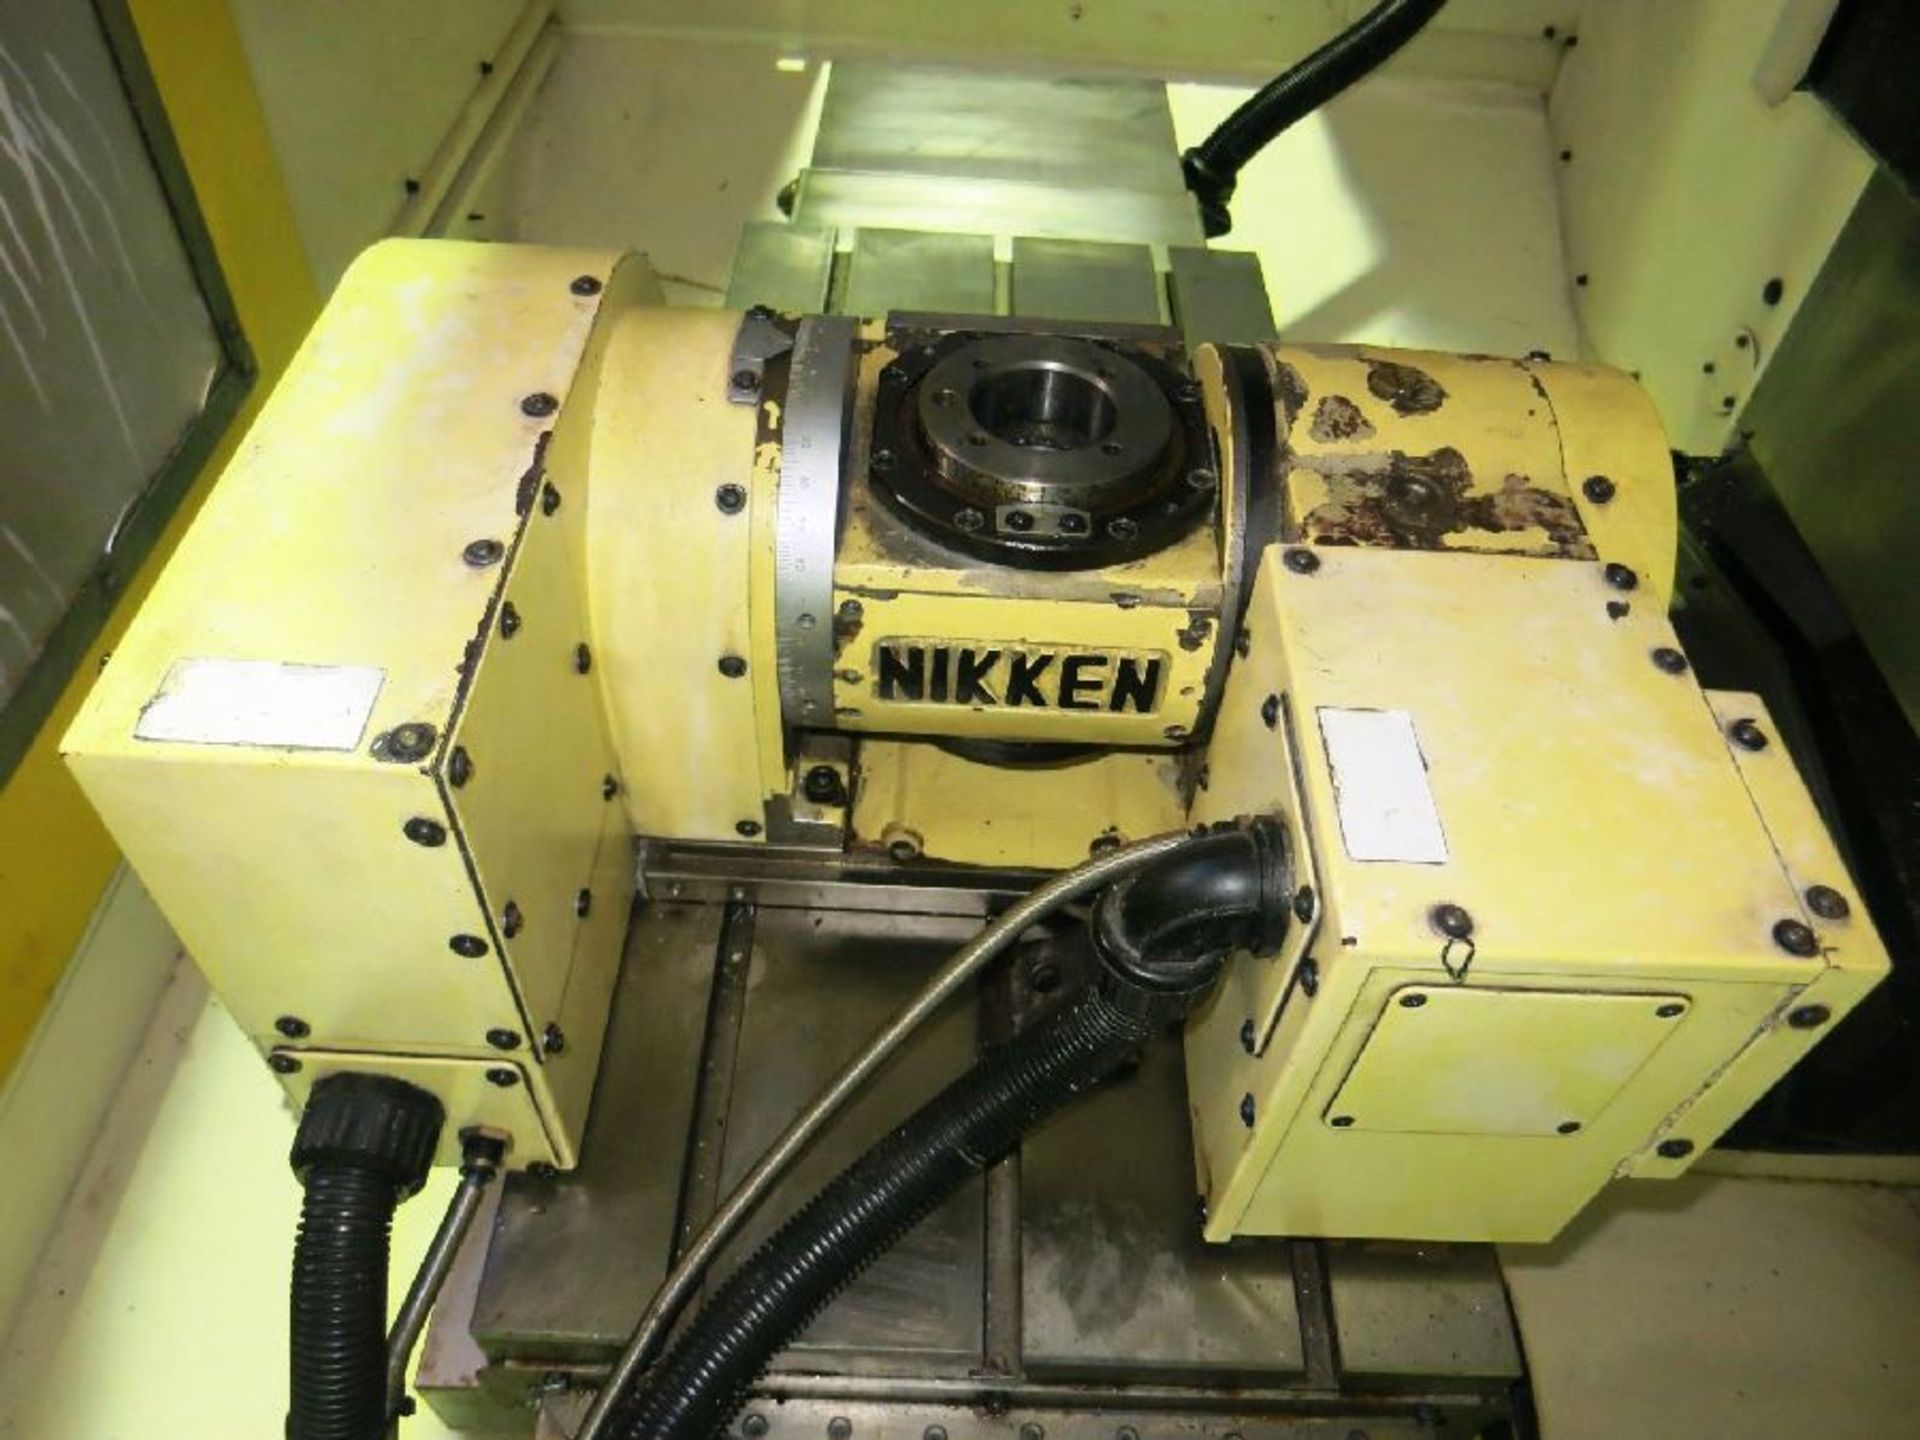 Nikken 5AX-130 WA21 Compact Tilting Rotary Table - 4th & 5th Axis Indexer, S/N WA21-1931H, New - Image 2 of 4